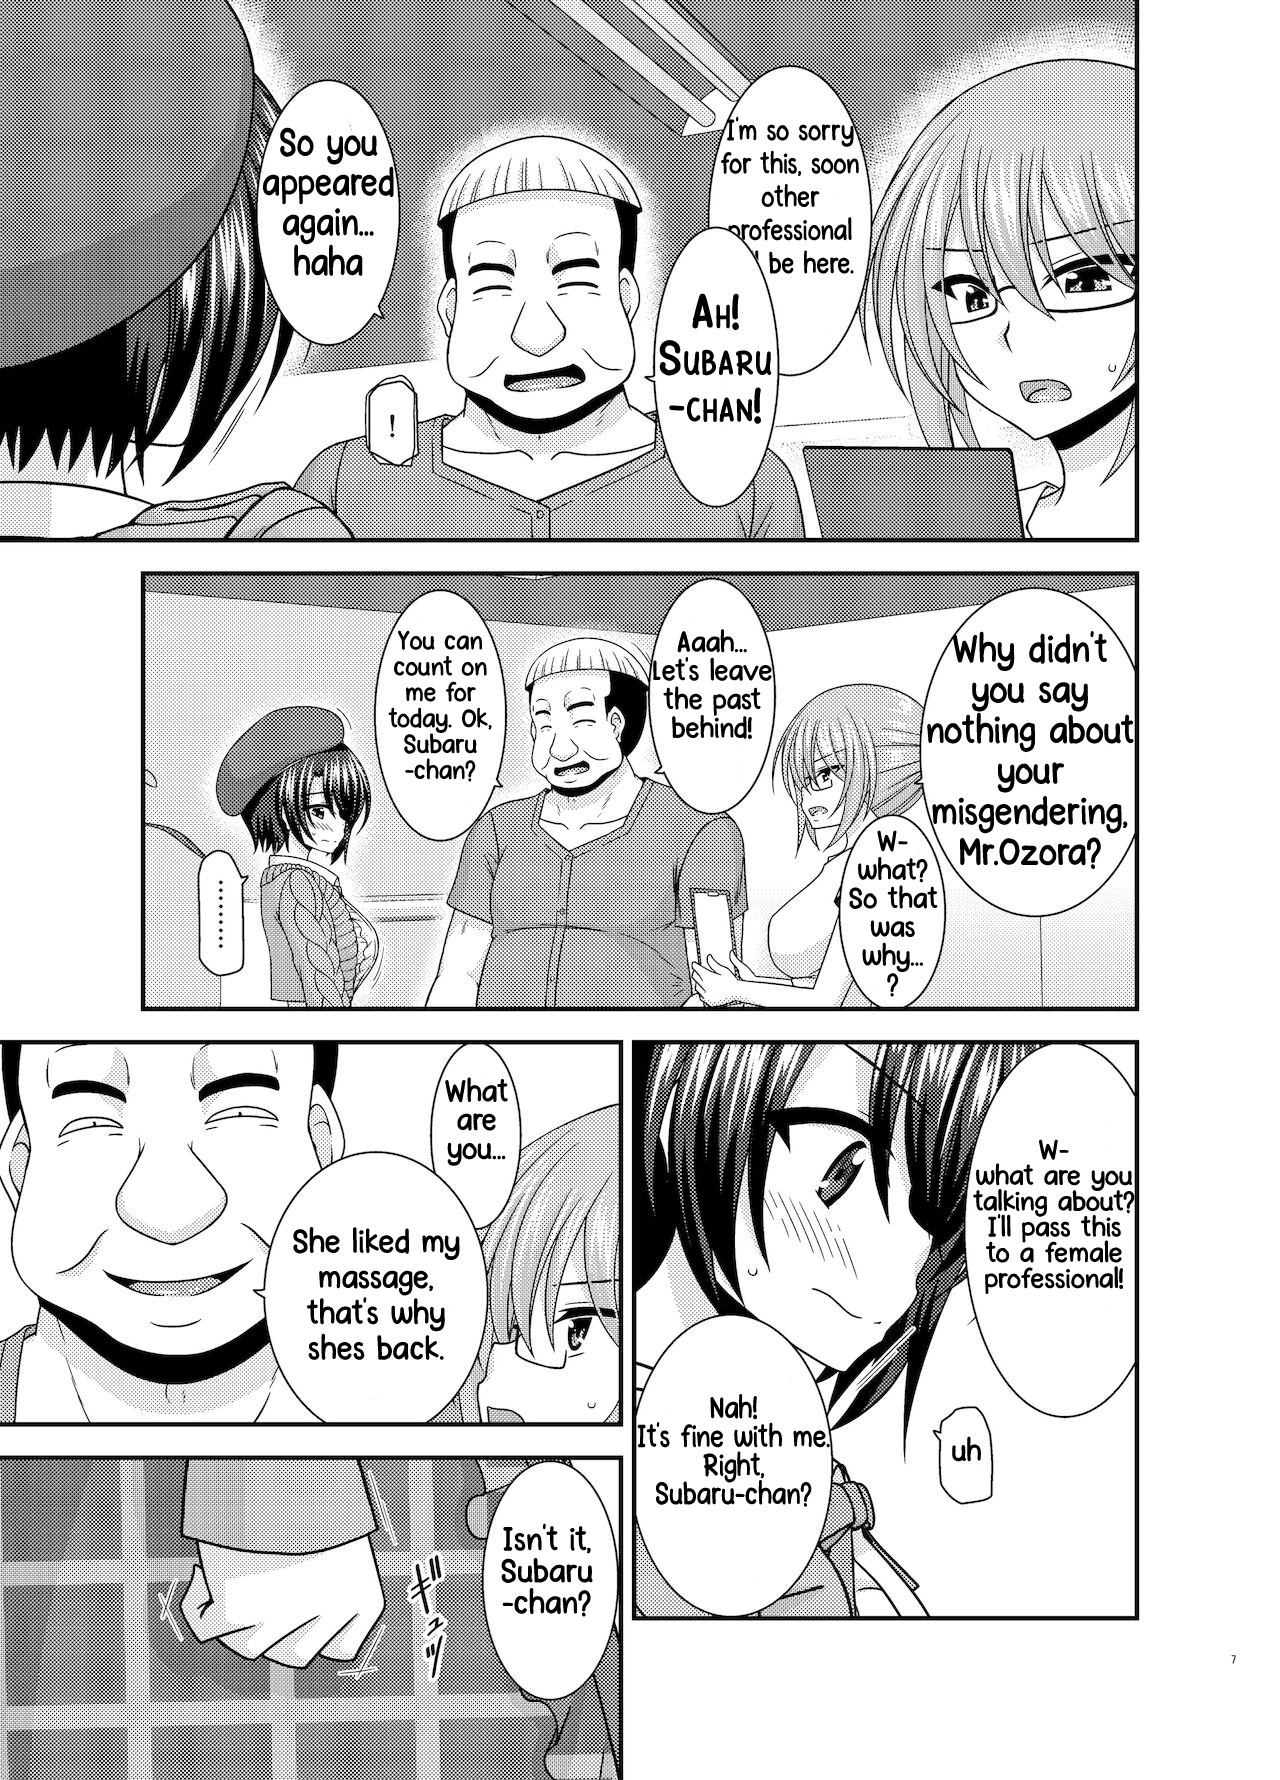 Hentai Manga Comic-The Story of a Vtuber Who Went To a Massage Parlor Only To End Up Getting Fucked After She Was Mistaken For a Boy --Chapter 3-4